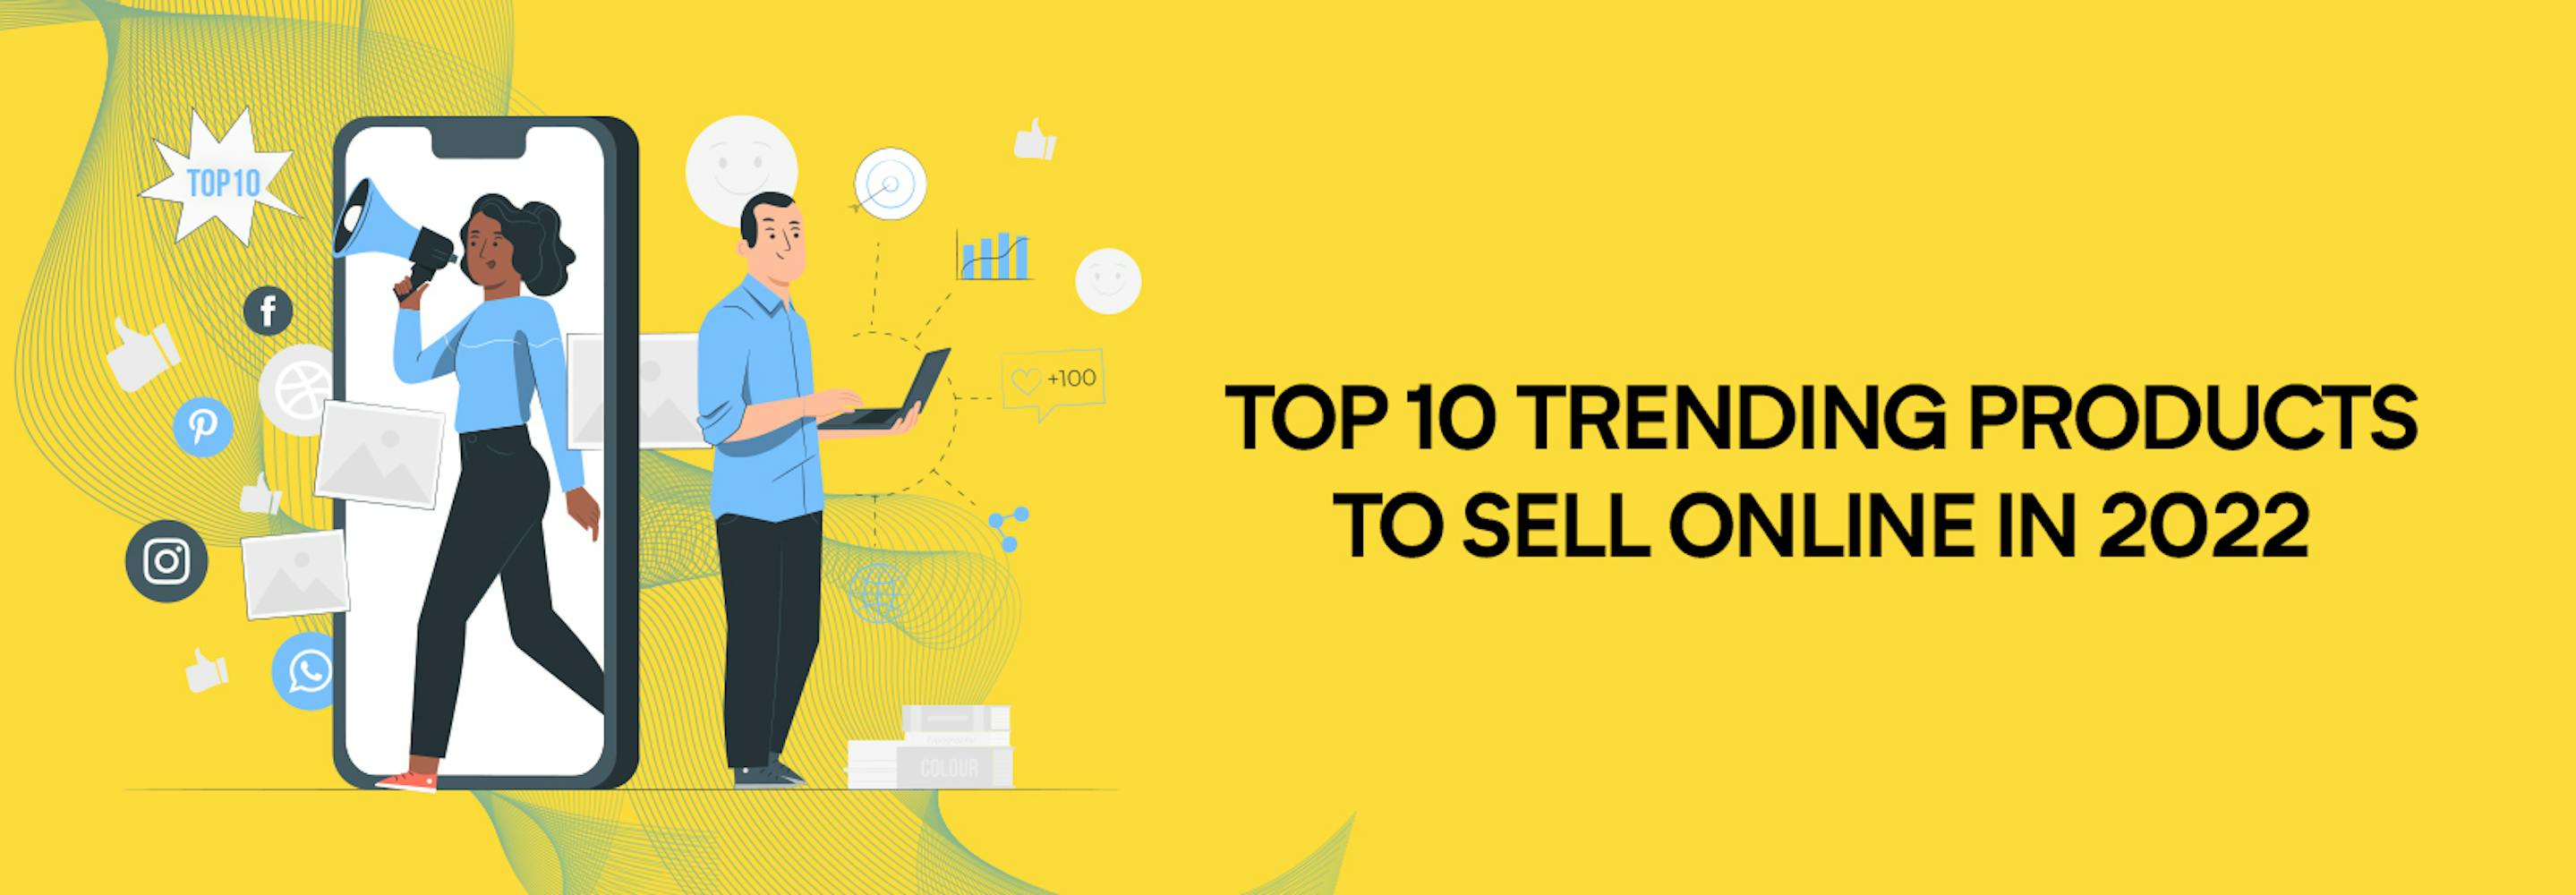 Top 10 trending products to sell online in 2022